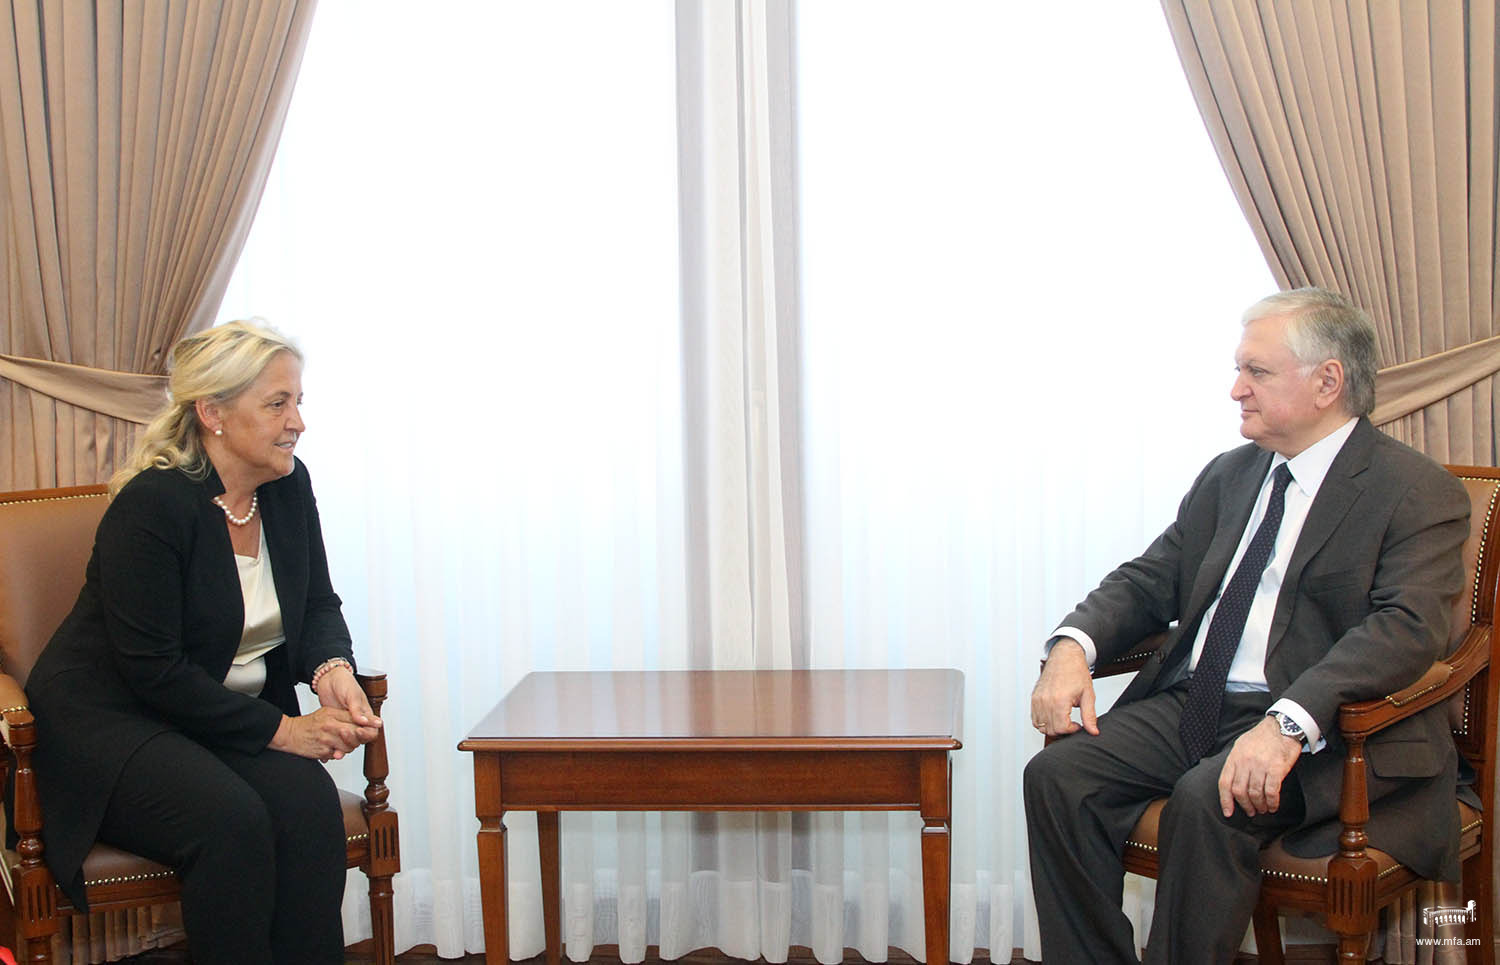 Minister of Foreign Affairs received the Ambassador of Latvia on the occasion of completing the diplomatic mission